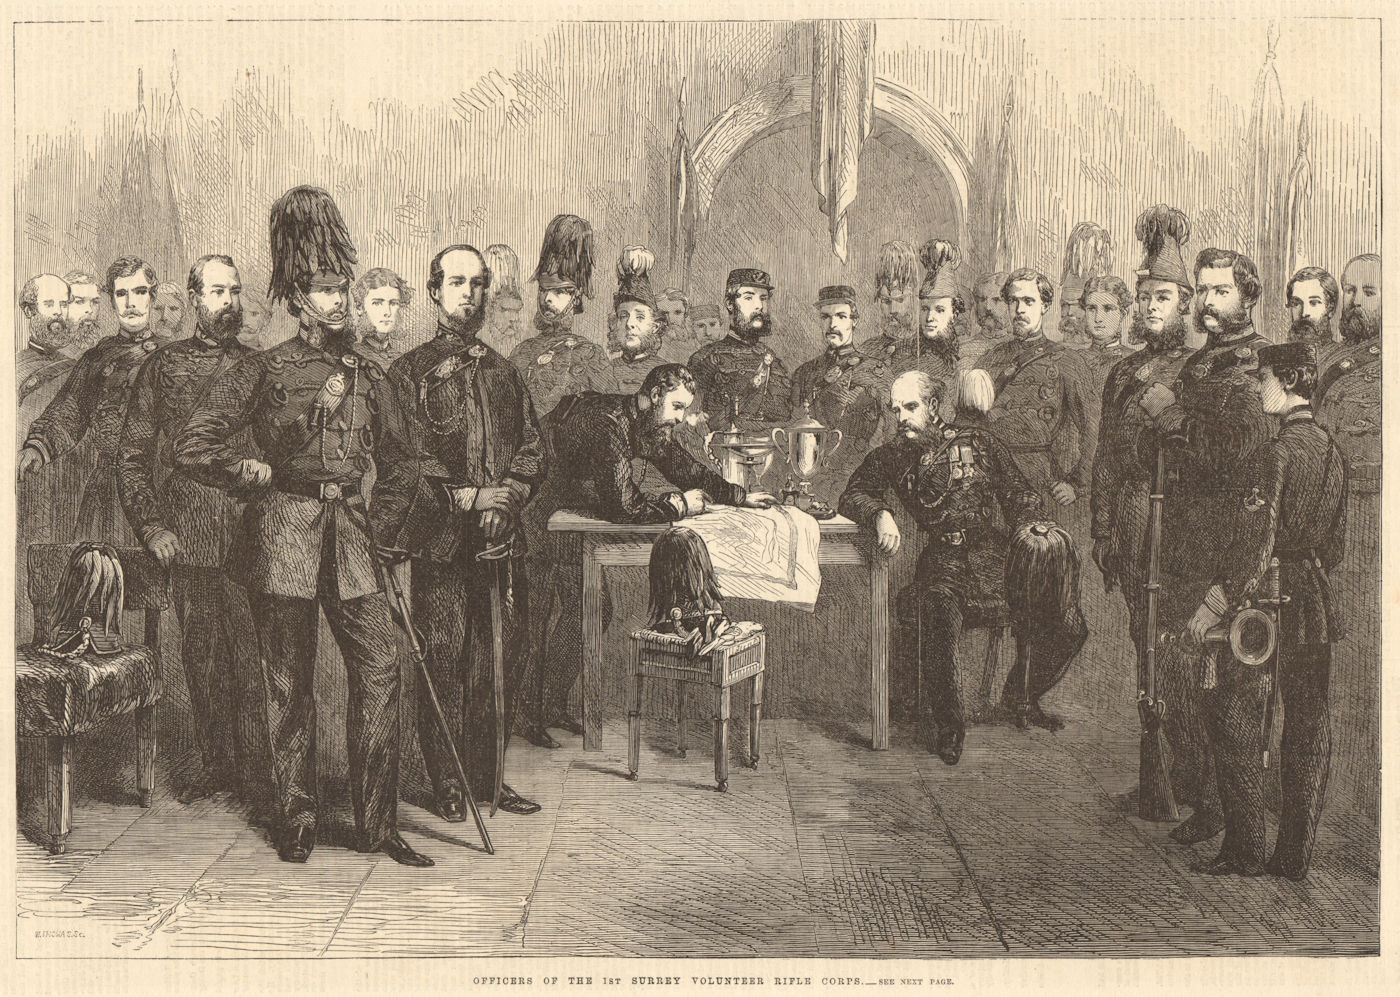 Officers of the 1st Surrey Volunteer Rifle Corps. Militaria 1864 old print